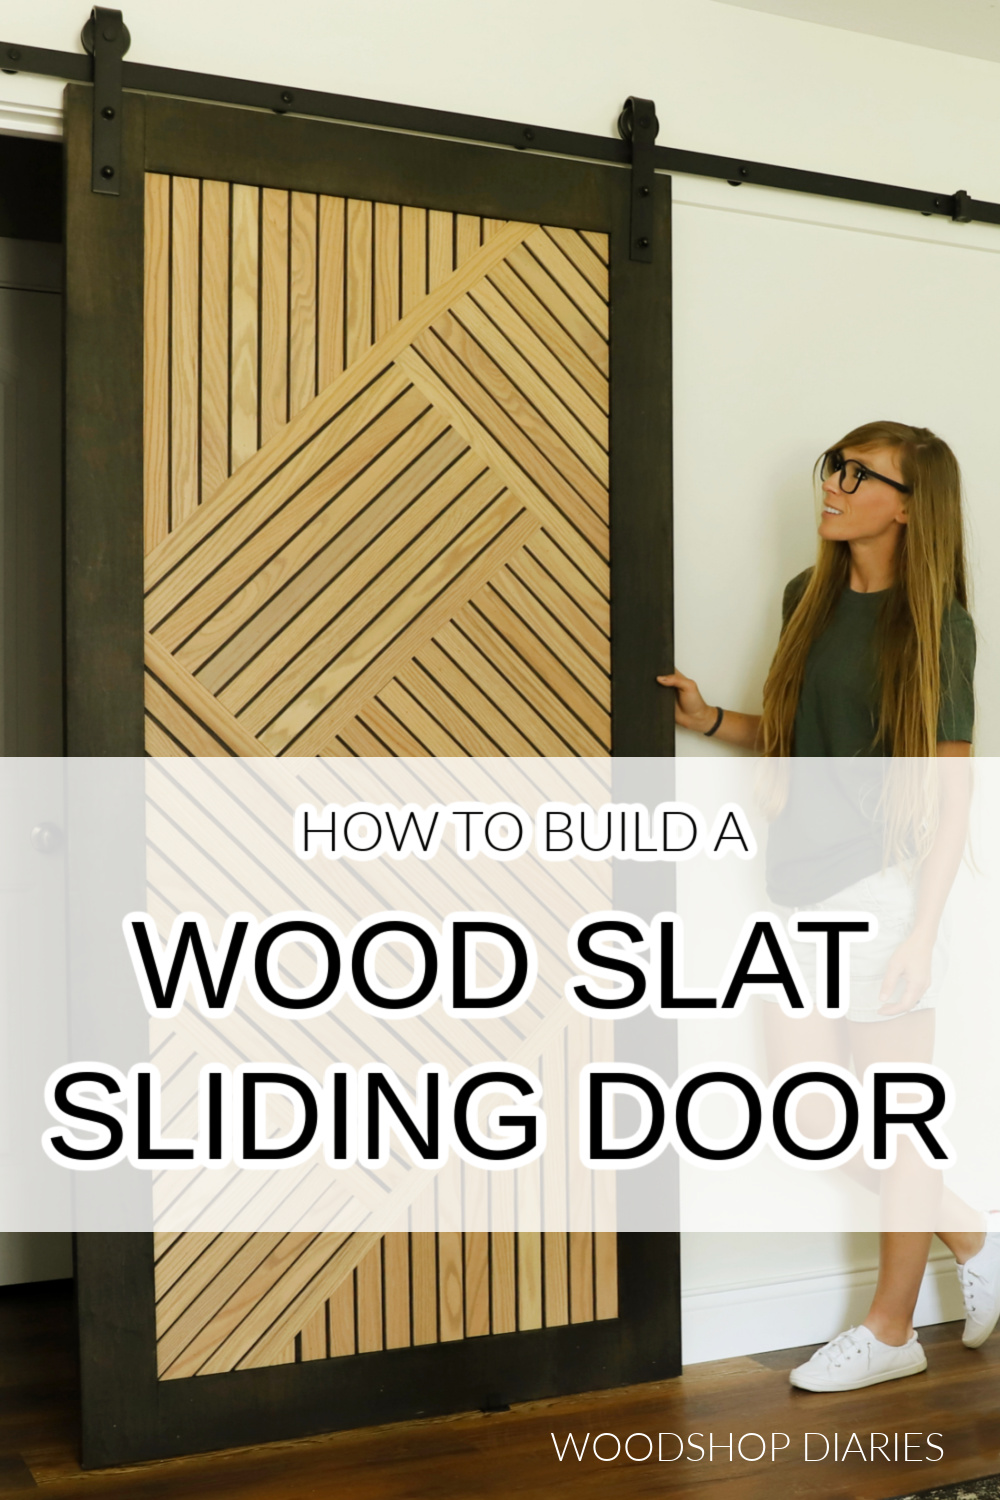 Shara Woodshop Diaries standing next to geometric wood slat sliding door with text overlay "how to build a wood slat sliding door"